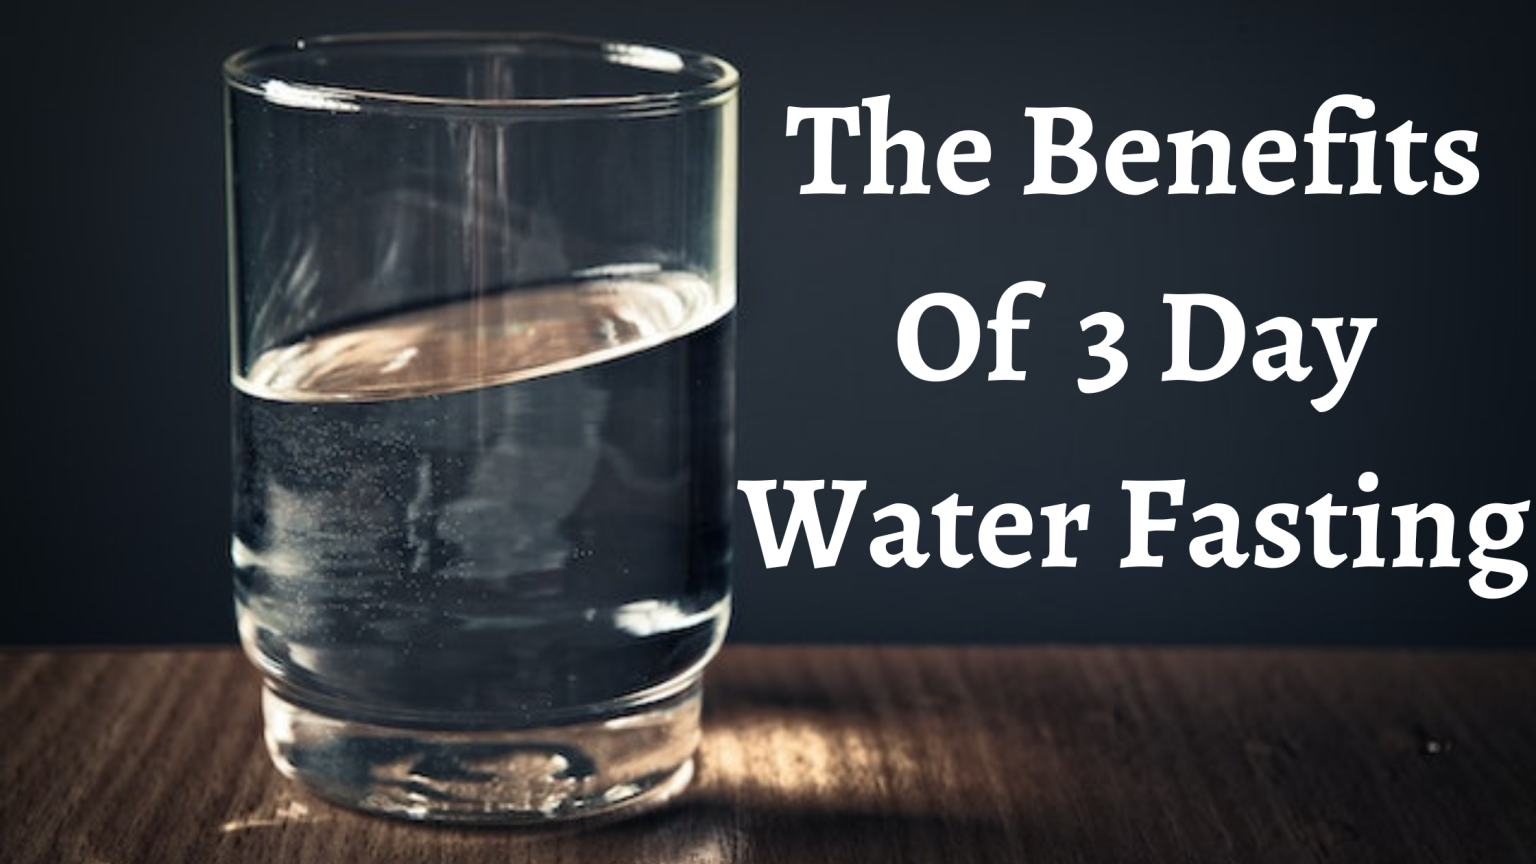 research on water fasting